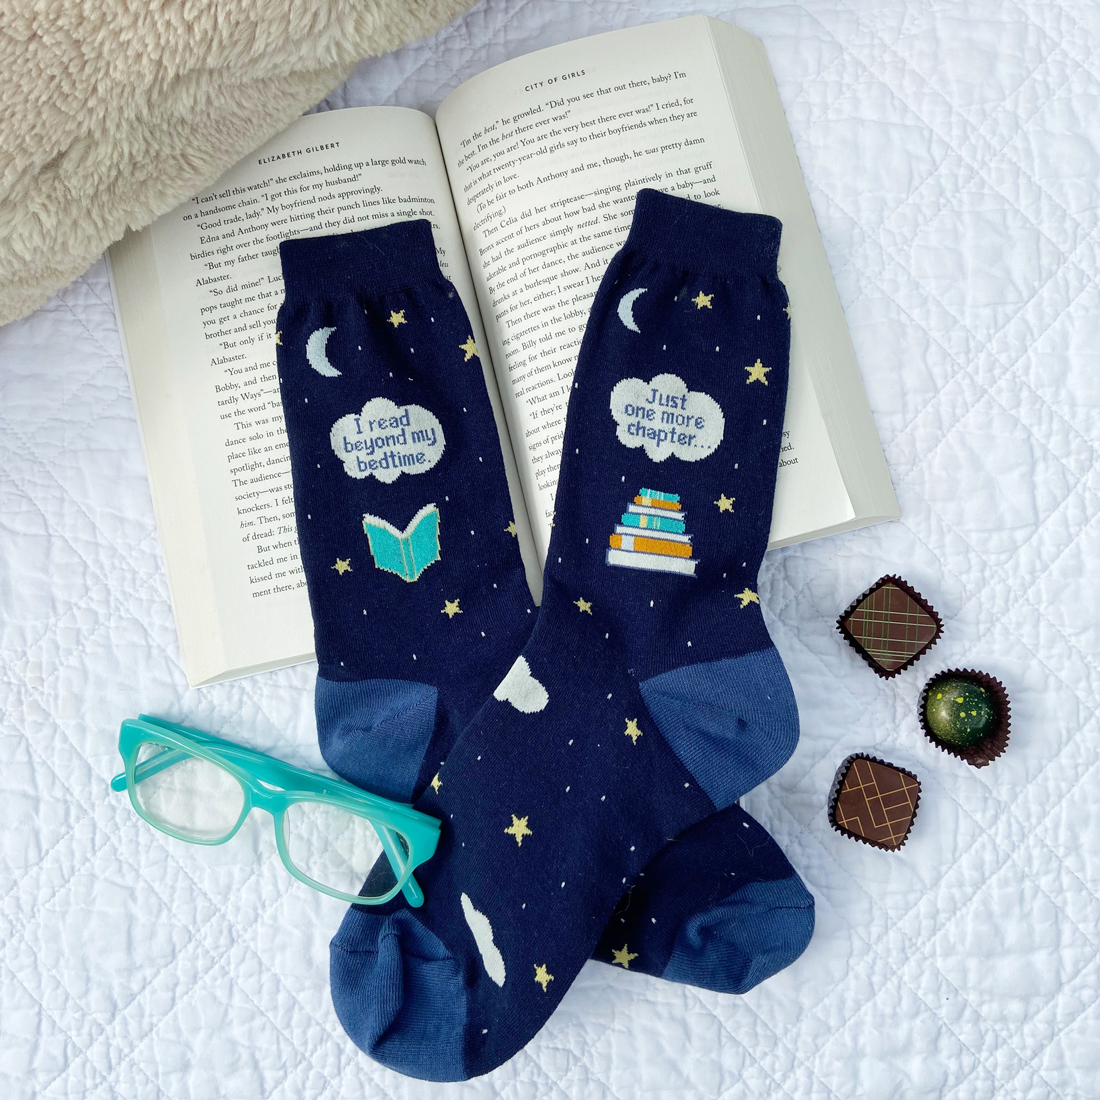 Photo of dark navy blue socks with a starry night and book design on them, laying on an open paperback book with tael reading glasses and some chocolate candies.